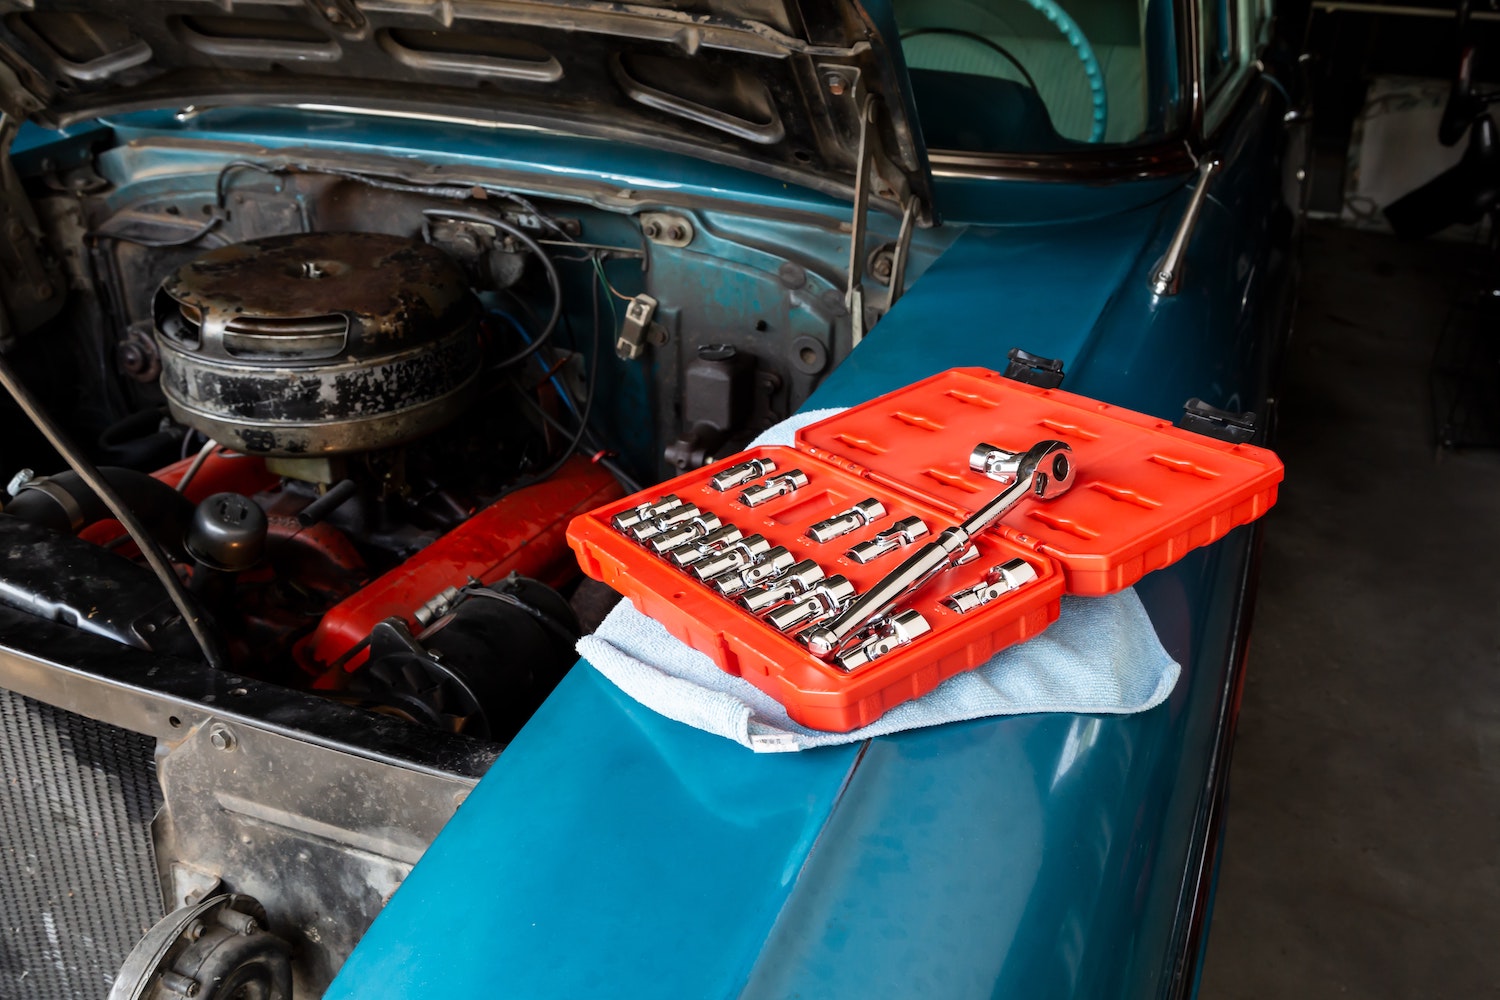 An orange box of sockets and a socket wrench, set on the blue fender of a classic car, its V8 engine visible in the background.